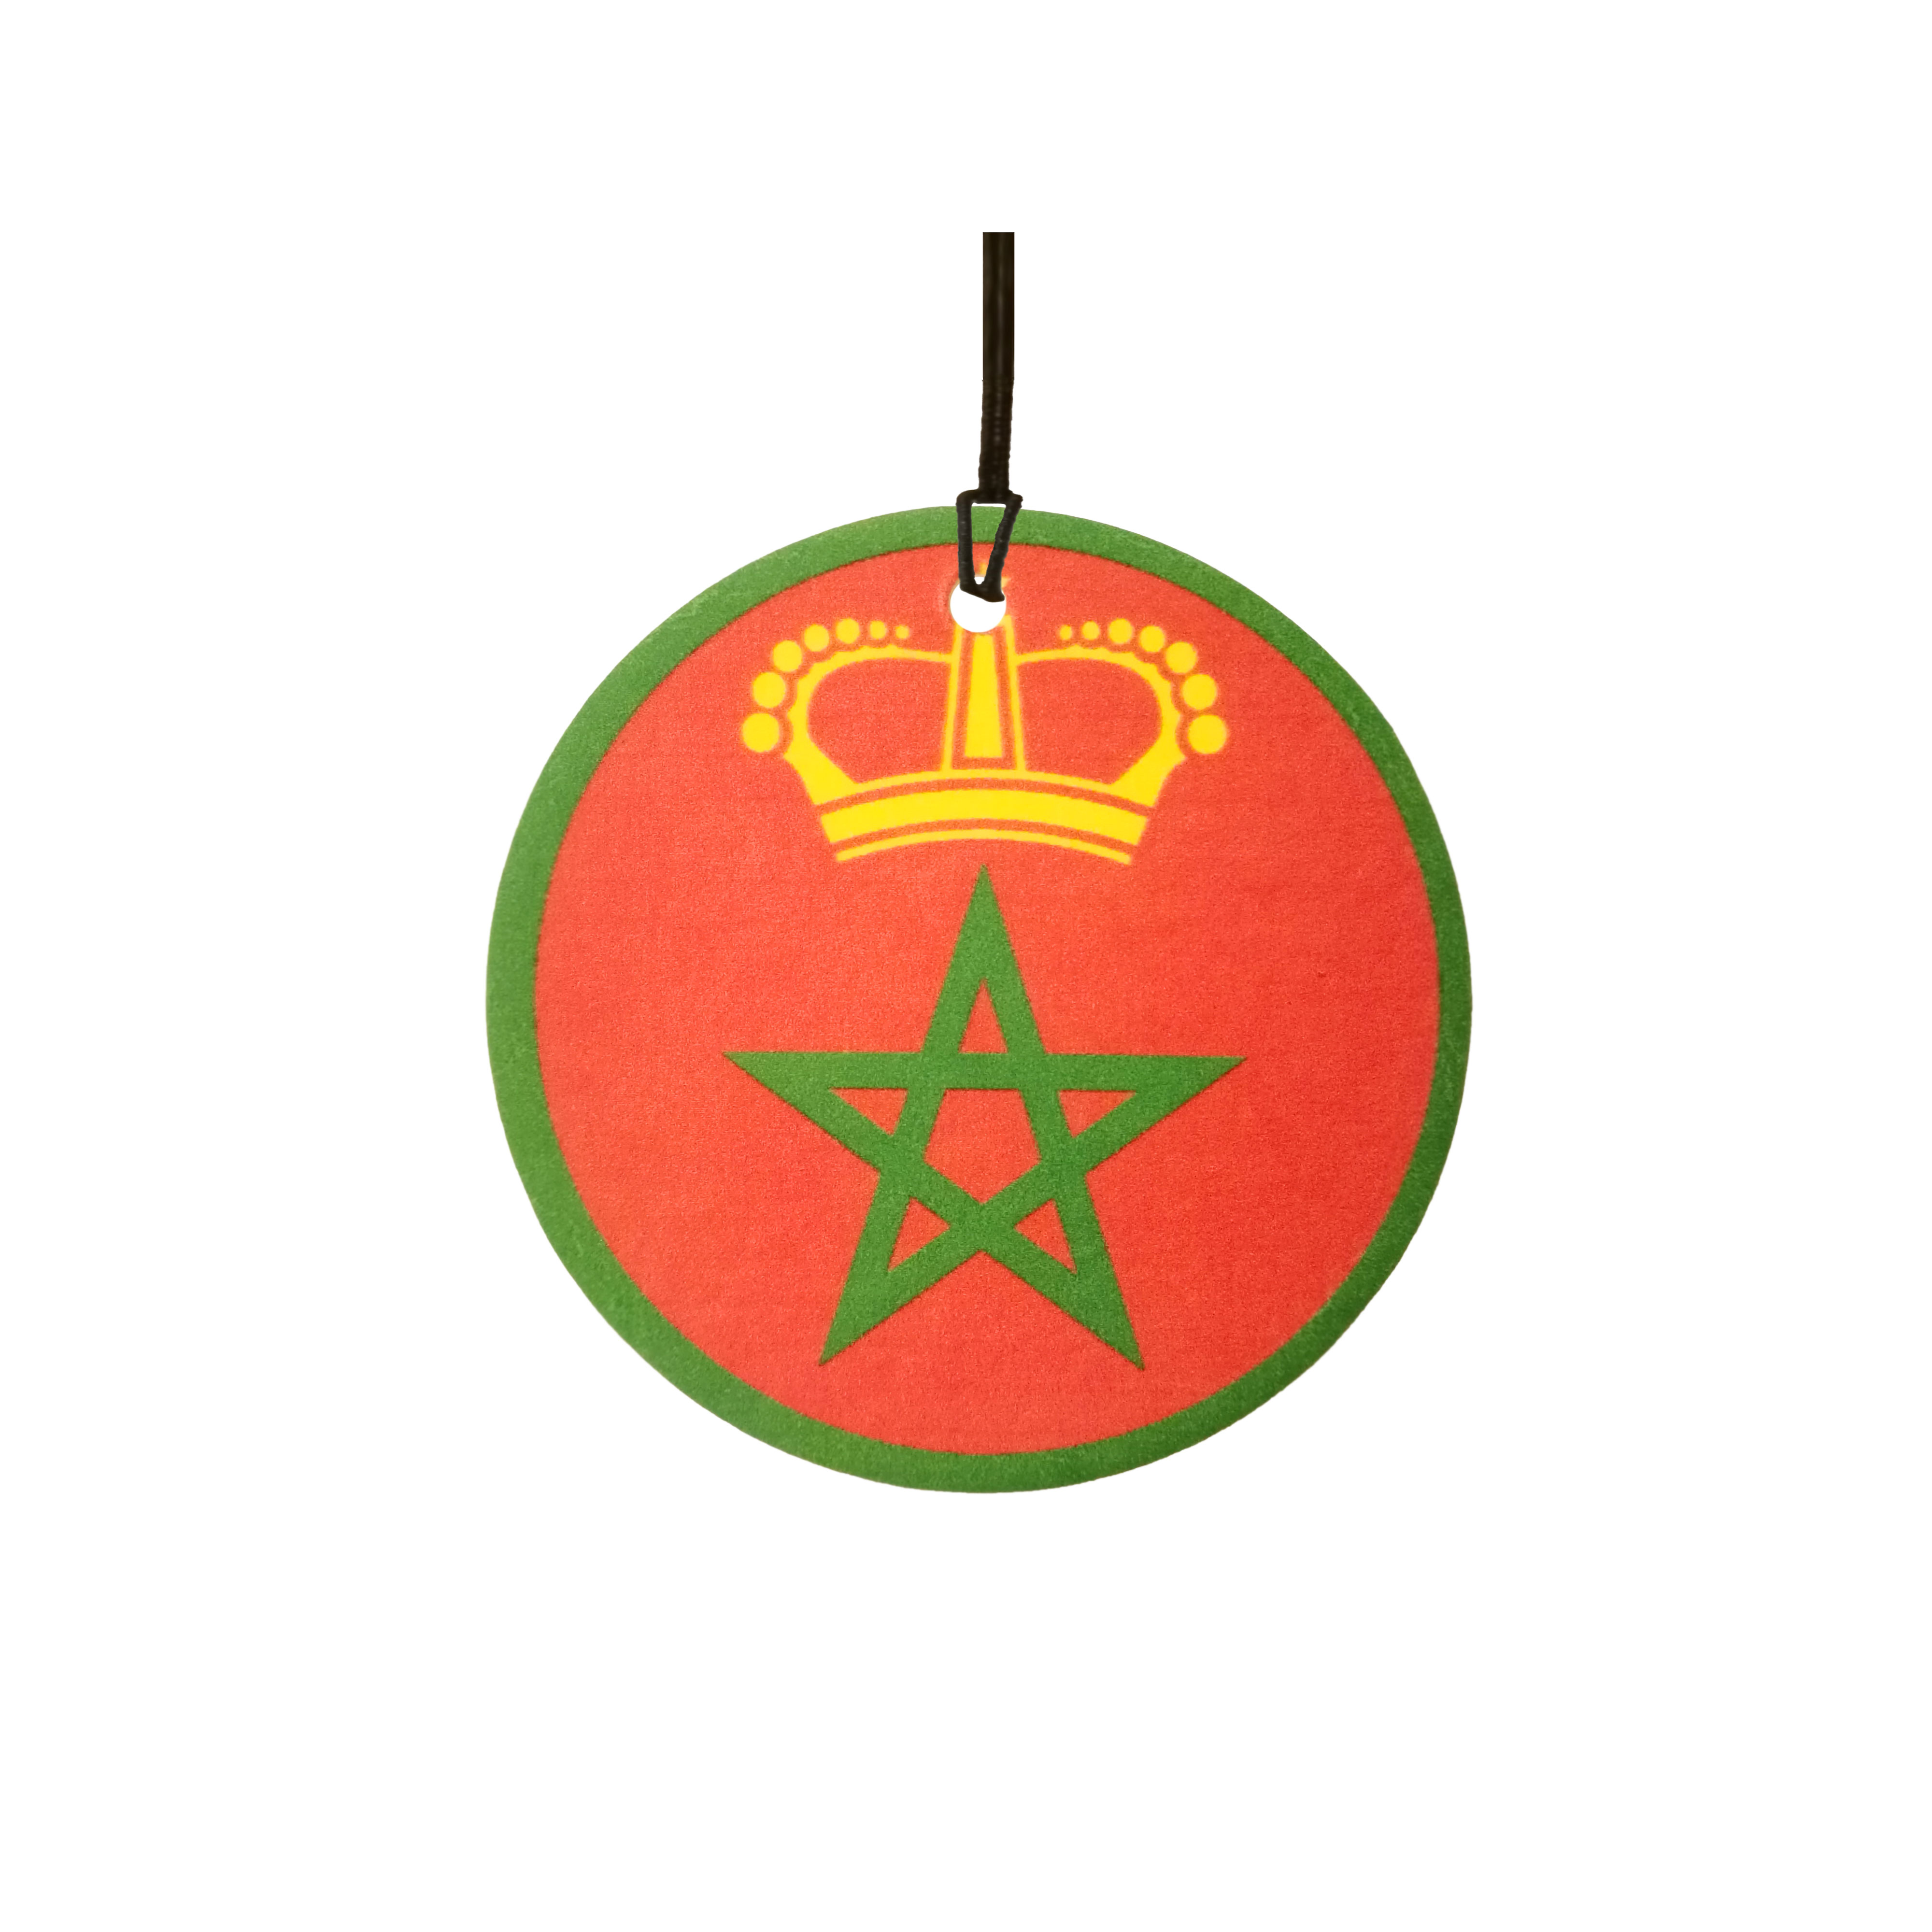 Royal Moroccan Air Force Roundel